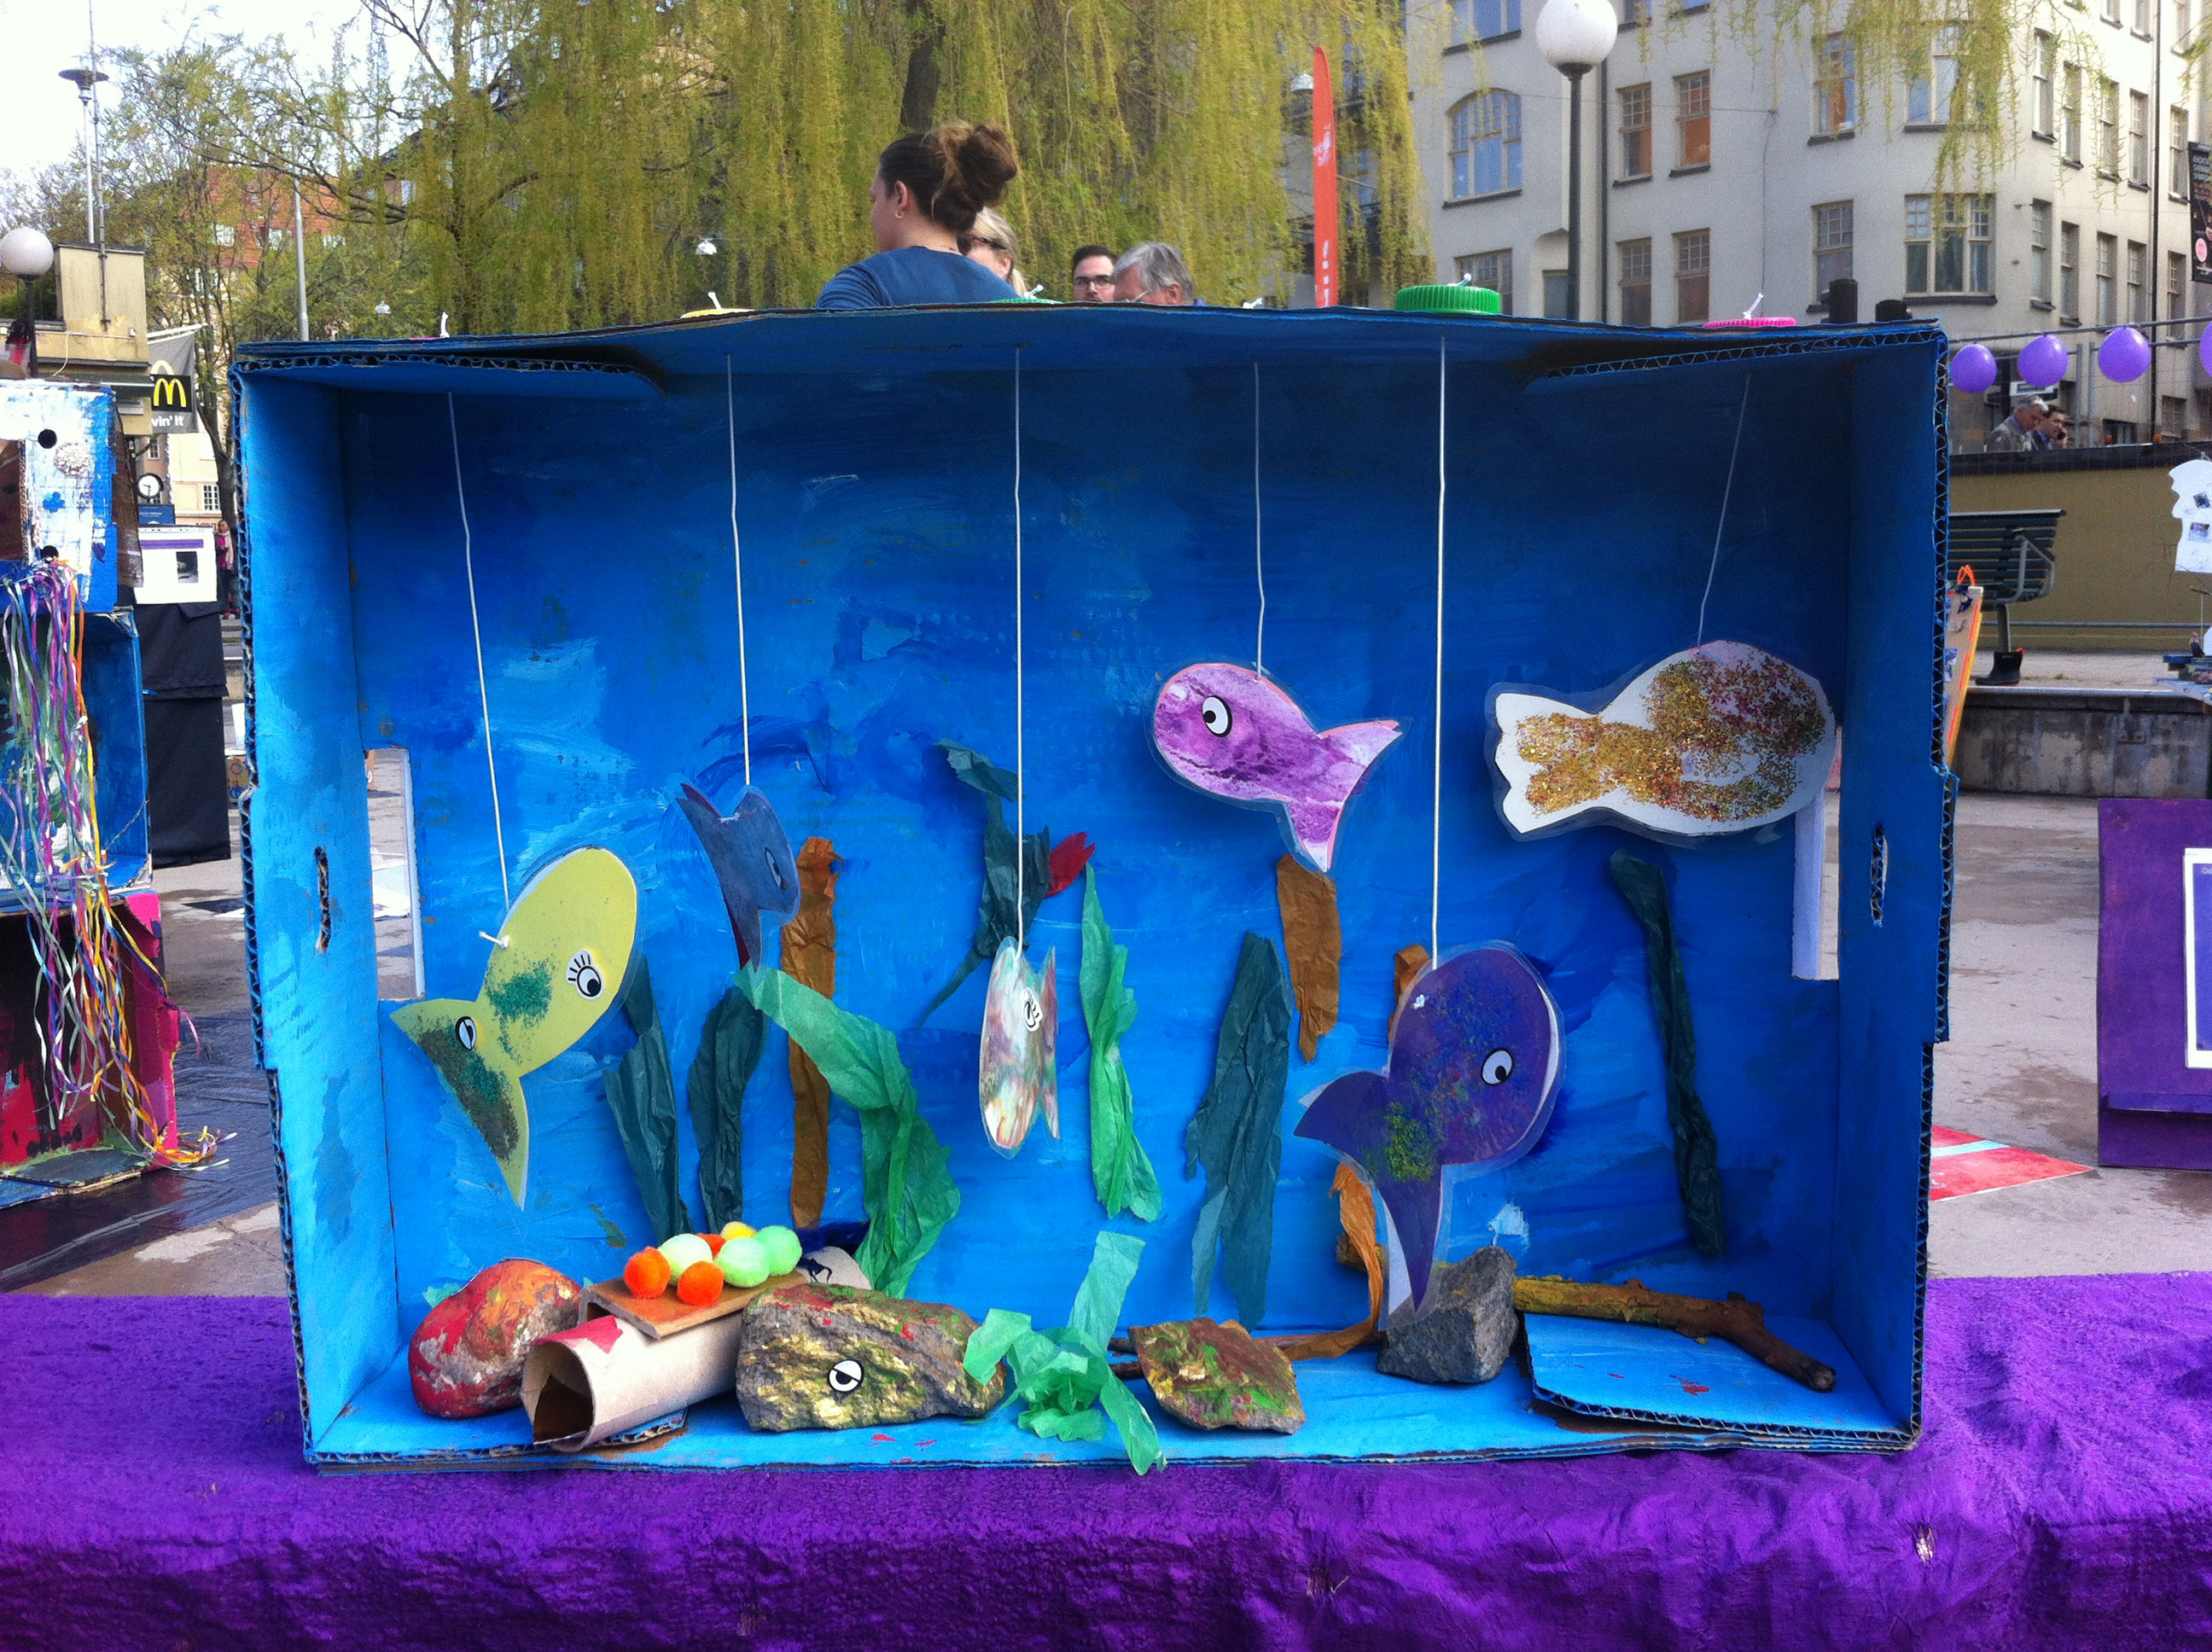 Children demonstrate their work of an aquarium made of recycling material at the preschool day in Stockholm on May. 18, 2017. [Photo: China Plus/Chen Xuefei]